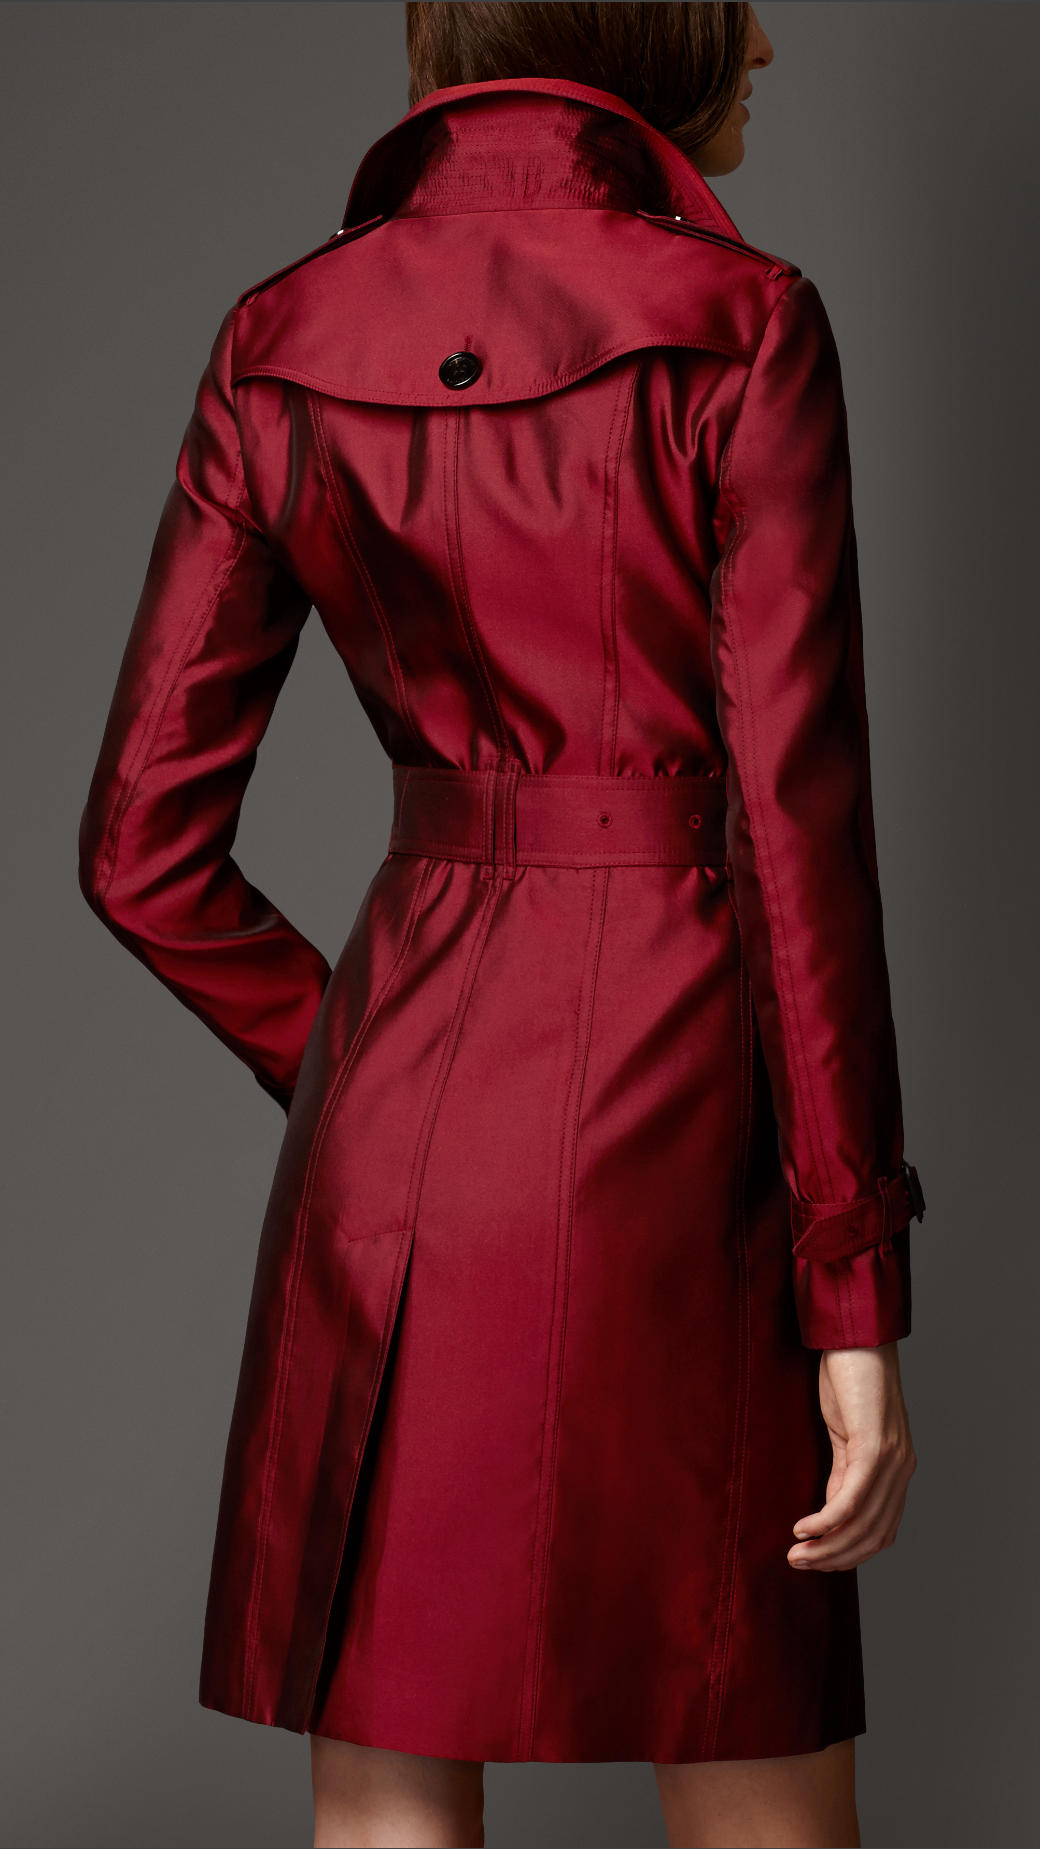 Burberry Silk Blend Trench Coat in Military Red (Red) - Lyst